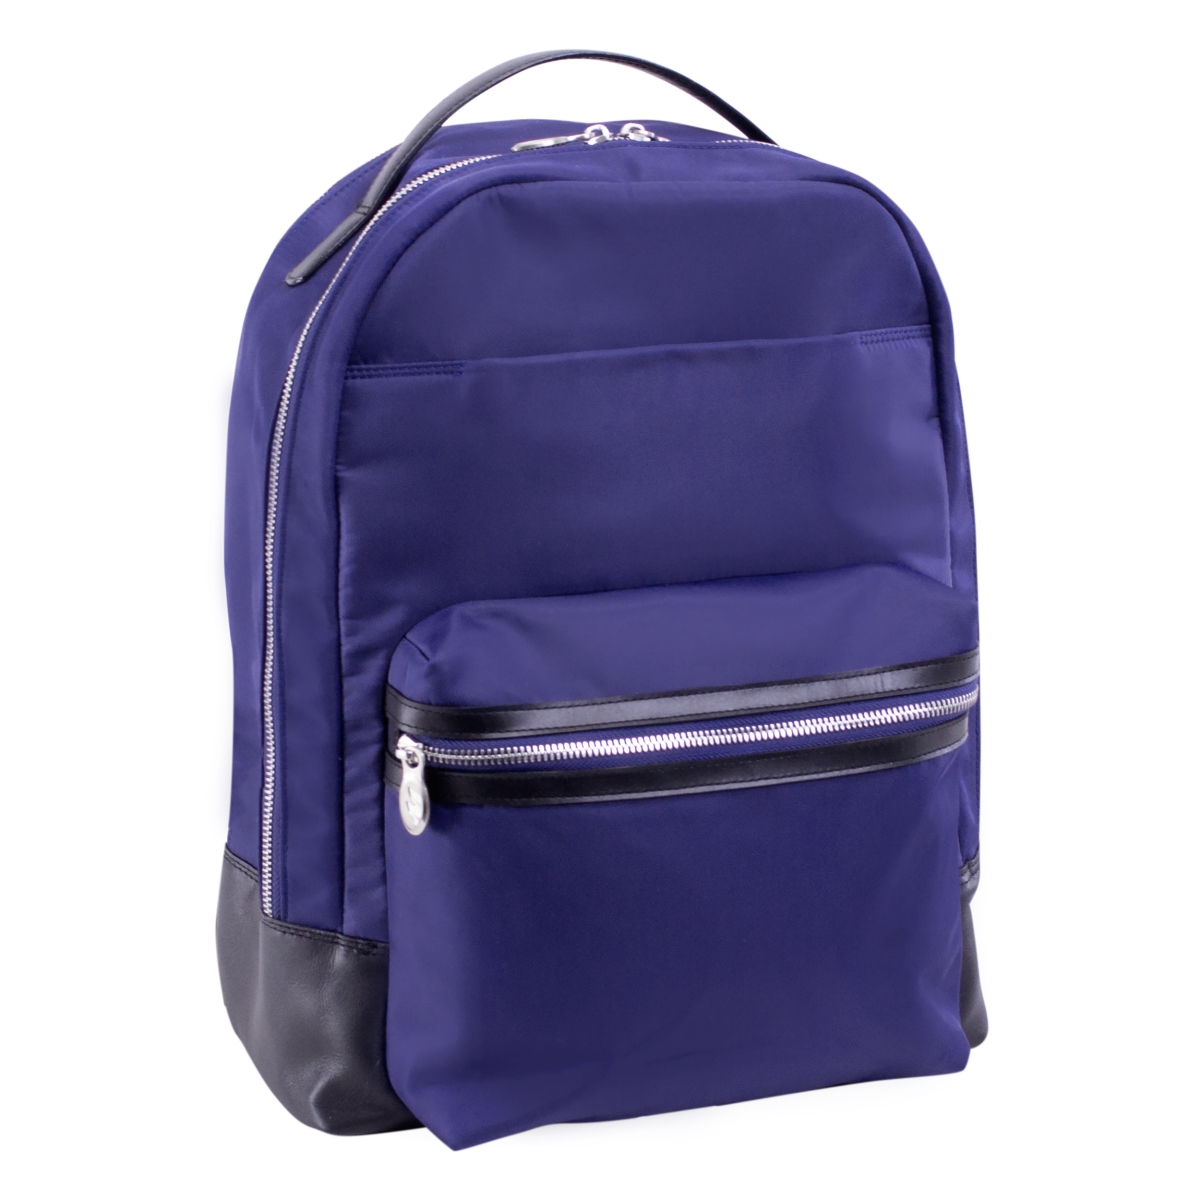 Mcklein Usa 18557 15 In. Parker Nylon Dual Compartment Laptop Backpack, Navy